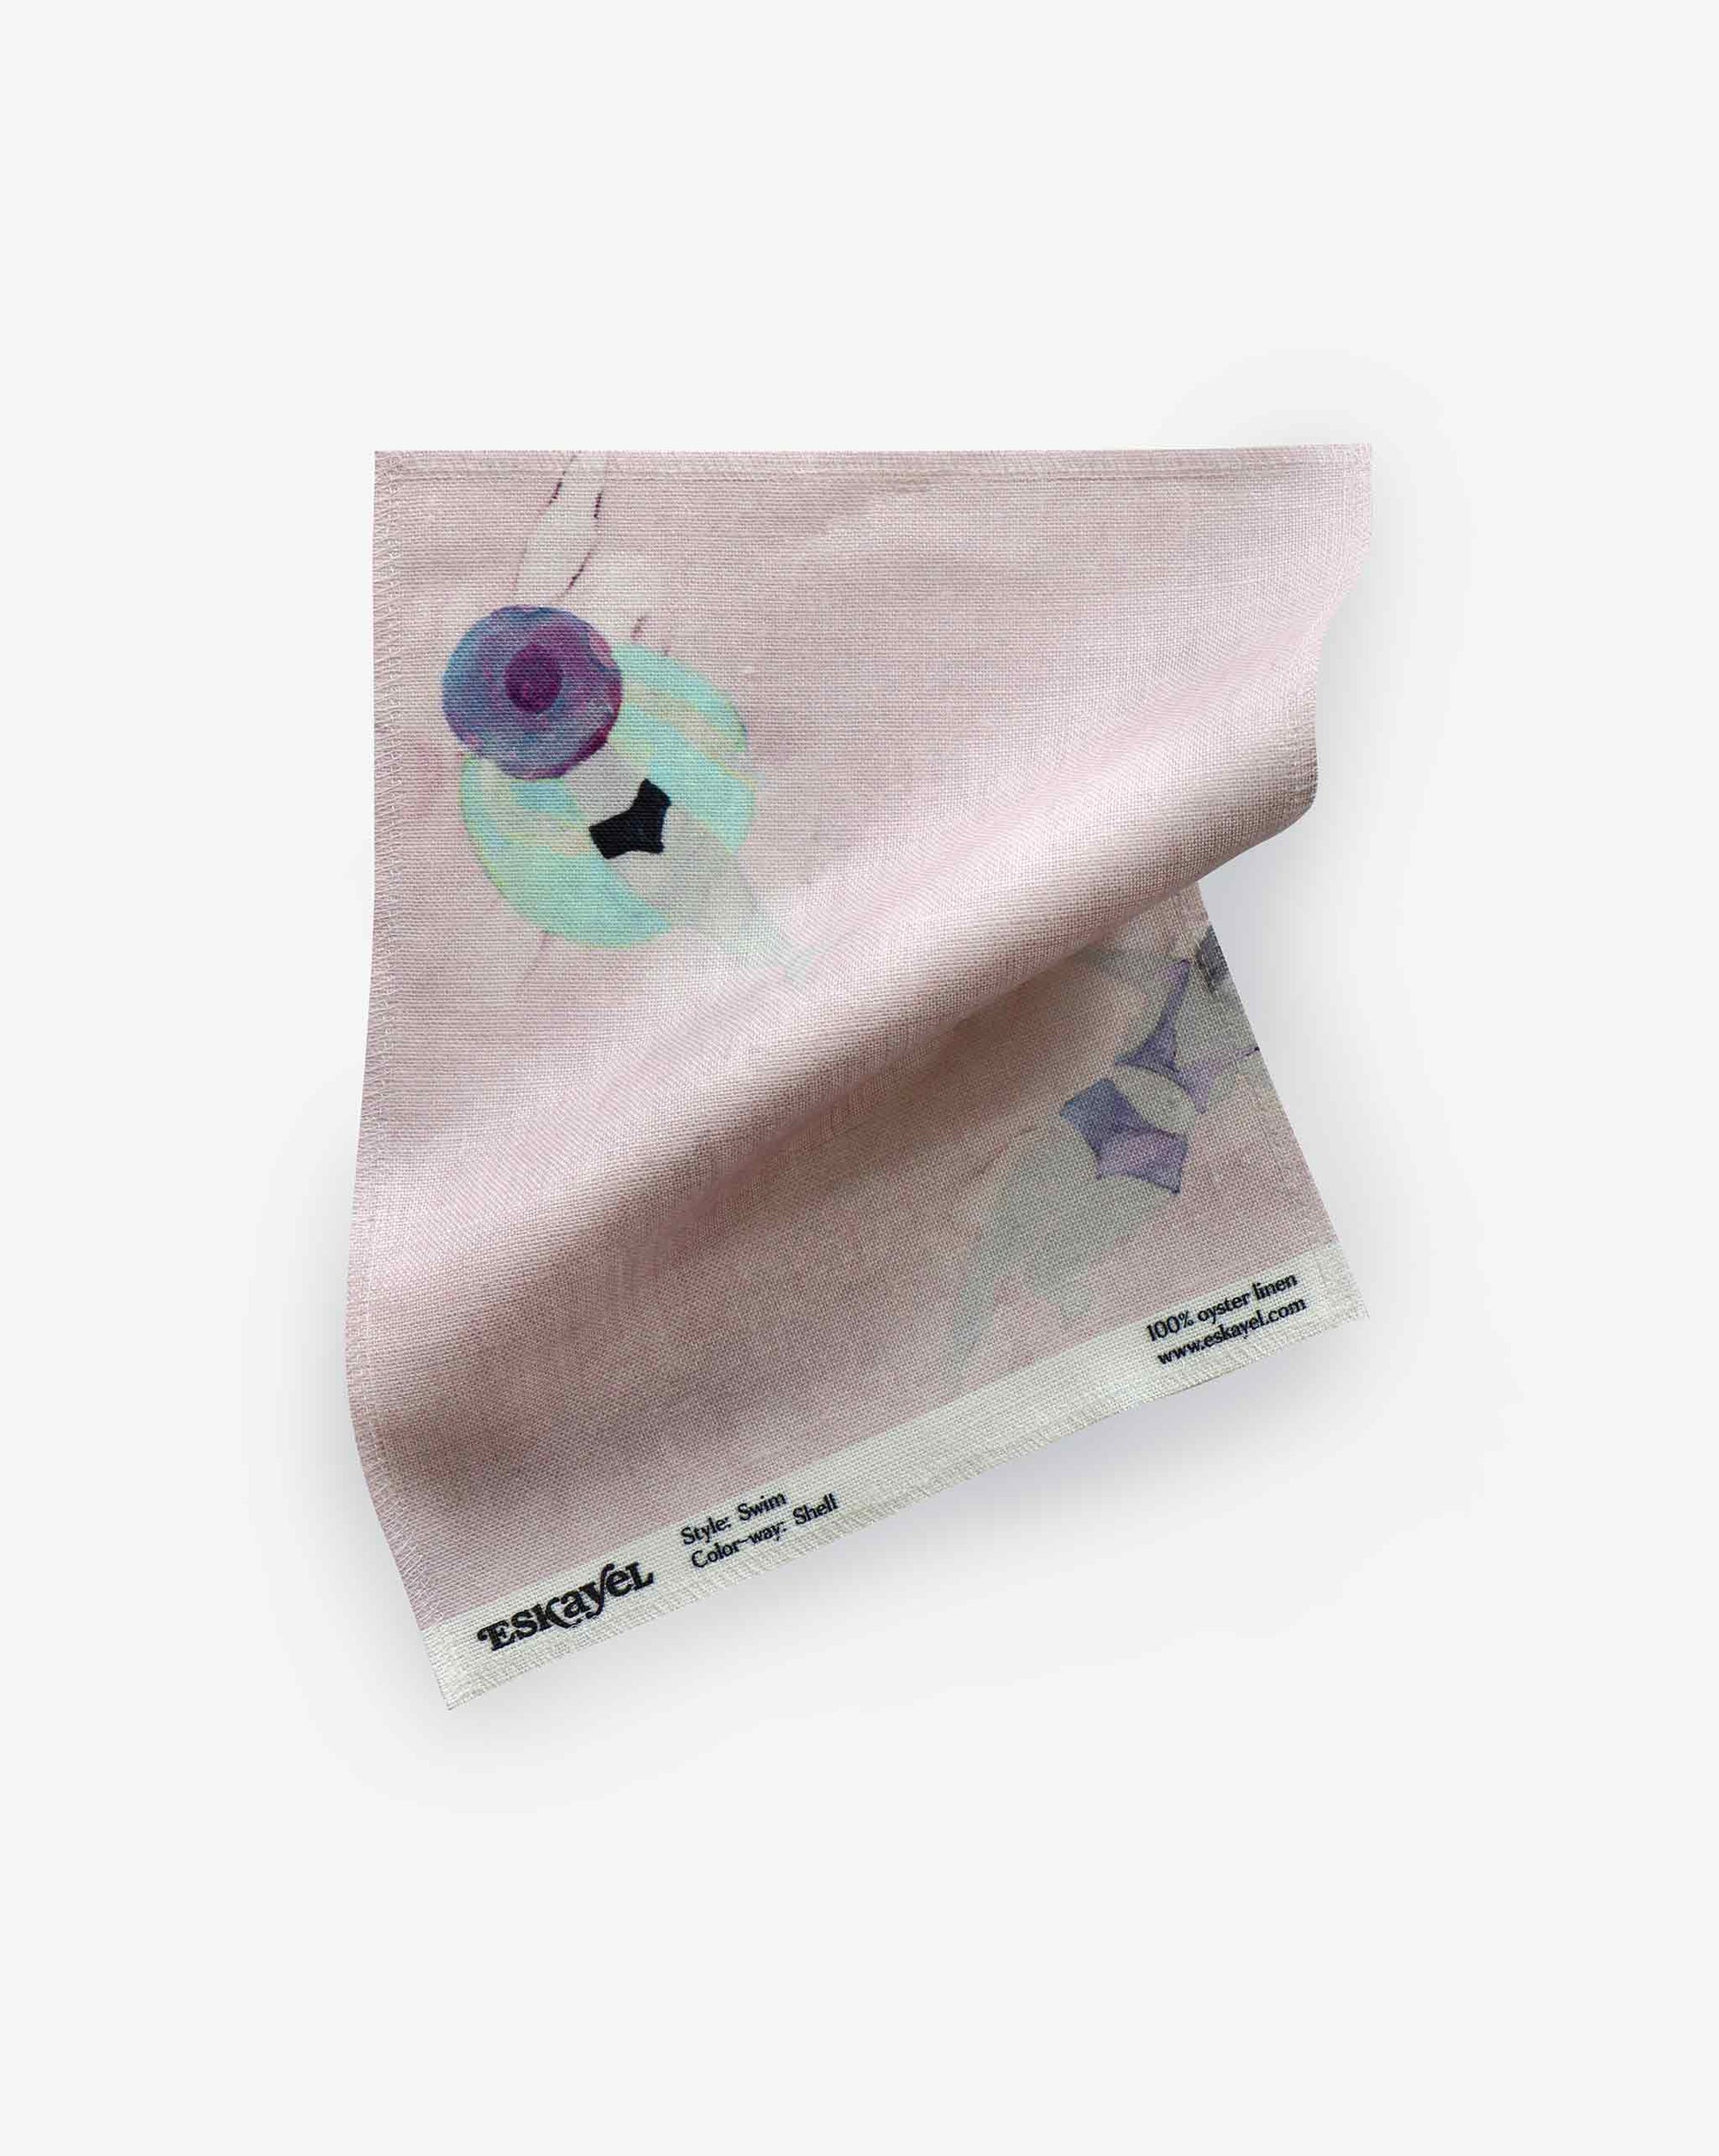 A fabric swatch with our Swim pattern in Shell featuring a design inspired by the sweet feeling of water against the skin with watercolor figures appearing against a light pink background.